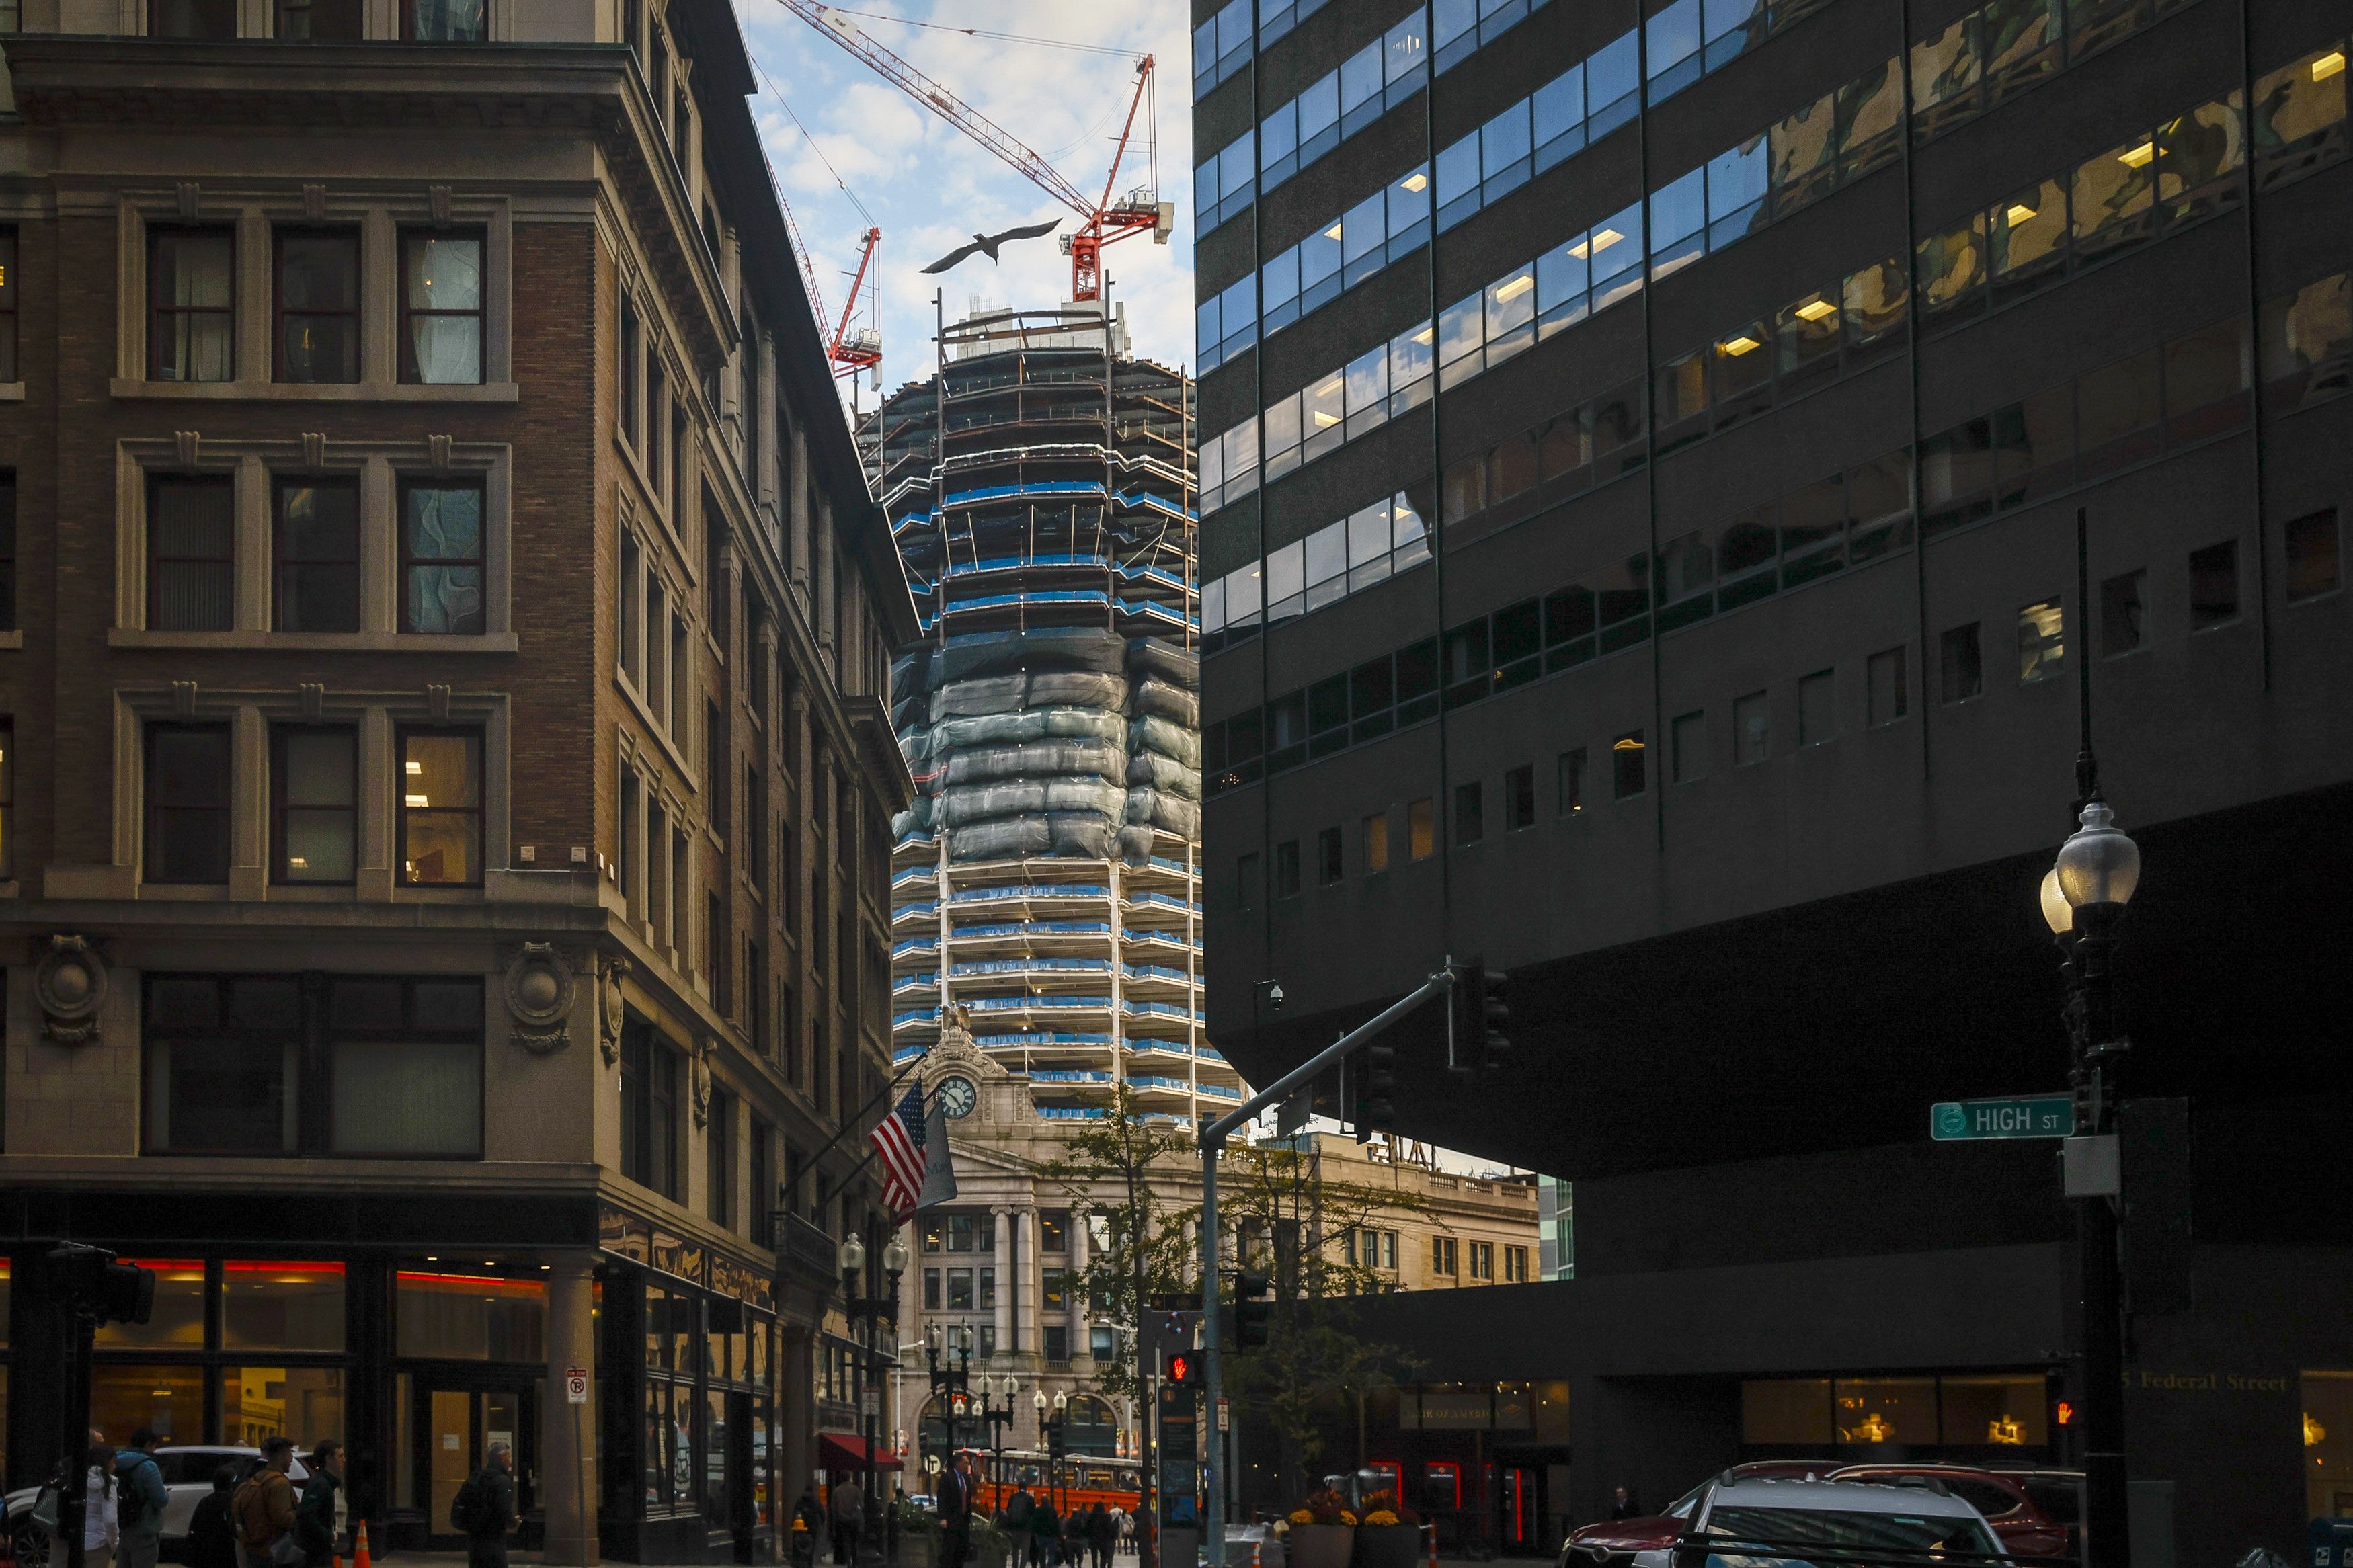 Behind two buildings in downtown Boston is the construction site of the South Station Tower, with two cranes placed at the top of the 51-story tower.